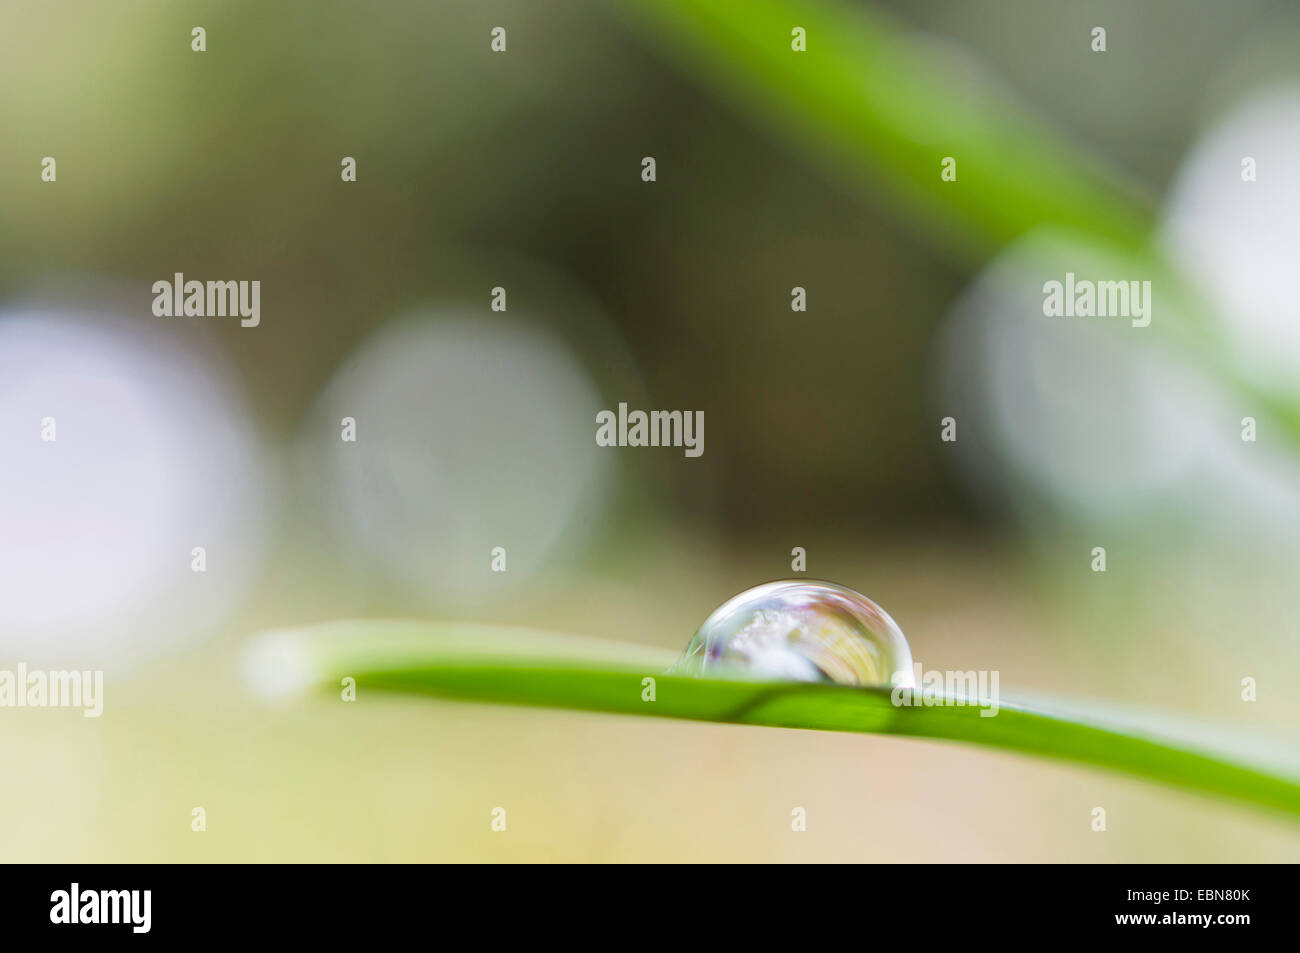 dewdrop on a blade of grass, Germany, Saxony Stock Photo